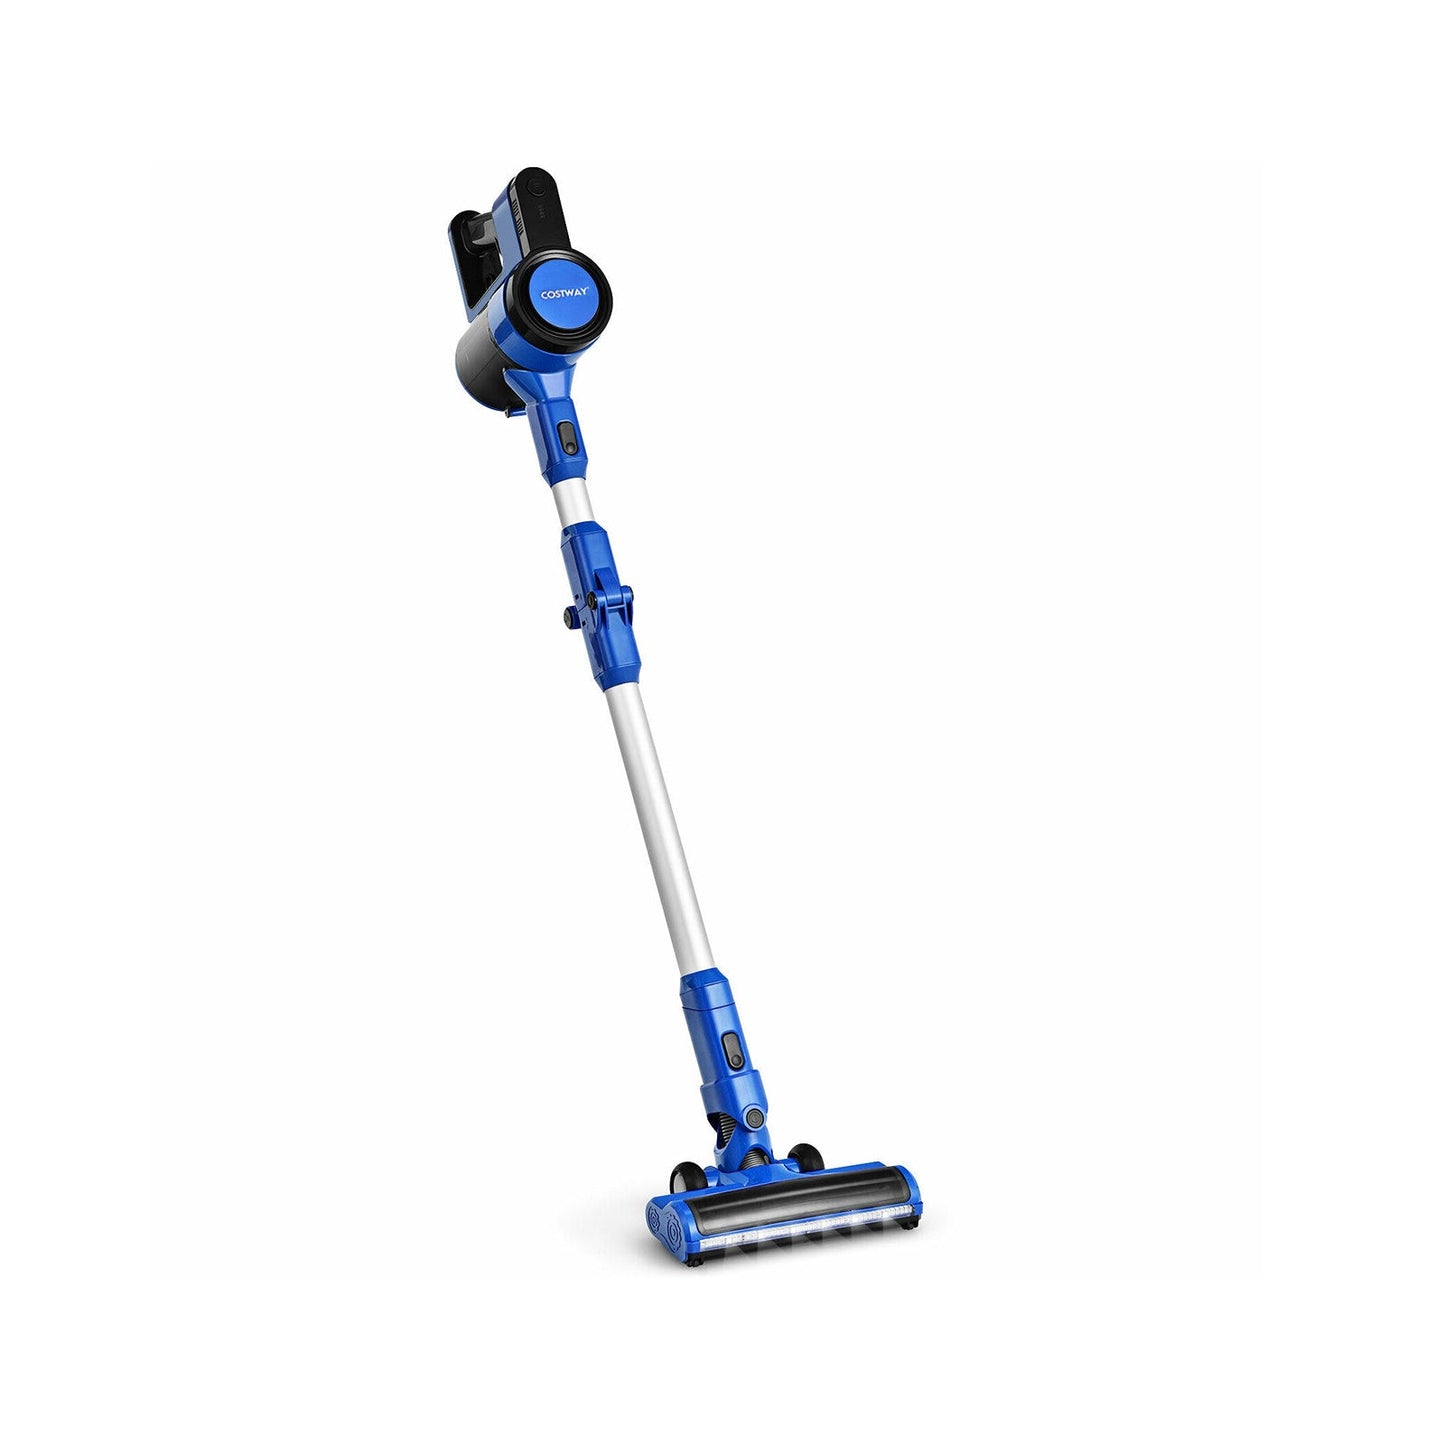 3-in-1 Handheld Cordless Stick Vacuum Cleaner with 6-cell Lithium Battery at Gallery Canada